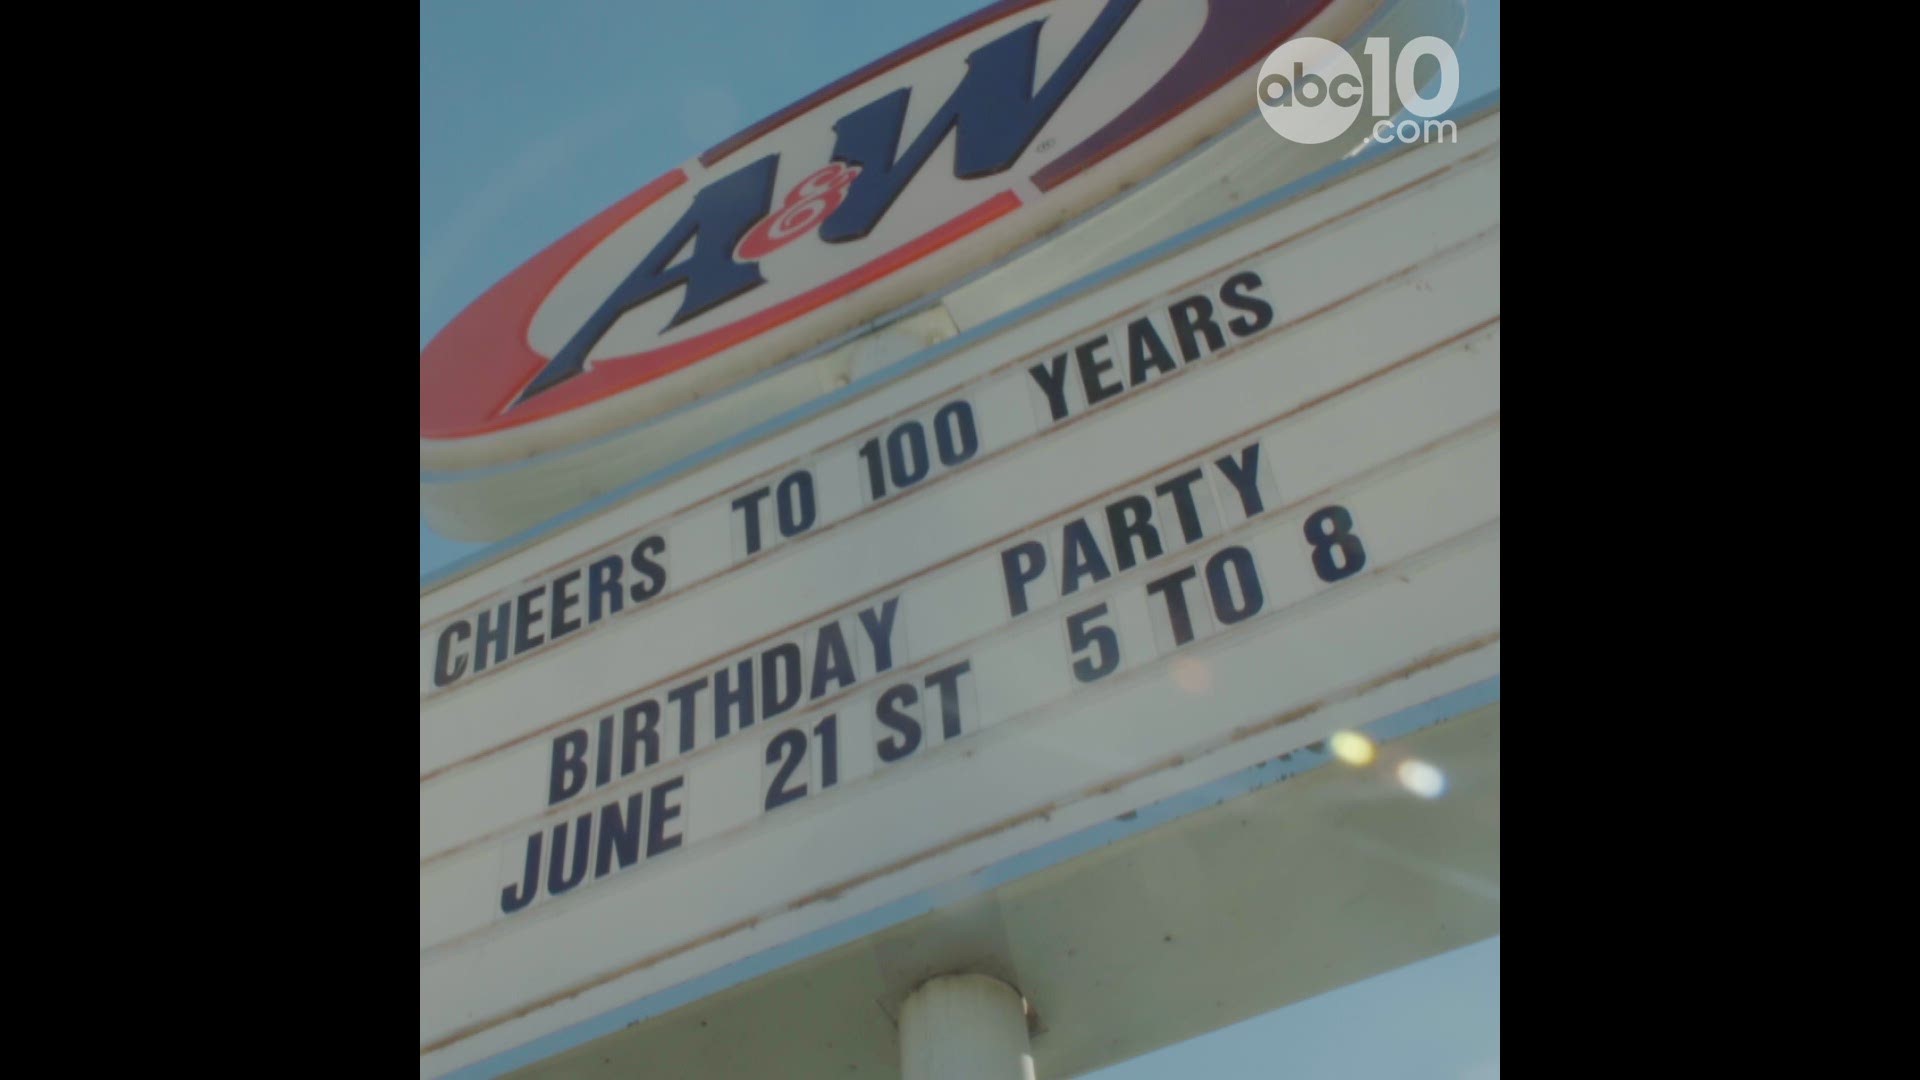 The A&W Restaurant in Lodi celebrates 100 years in business! In 1919, the famous beverage was sold at a roadside stand by Roy W. Allen during a parade to welcome home Lodi's World War I veterans.﻿